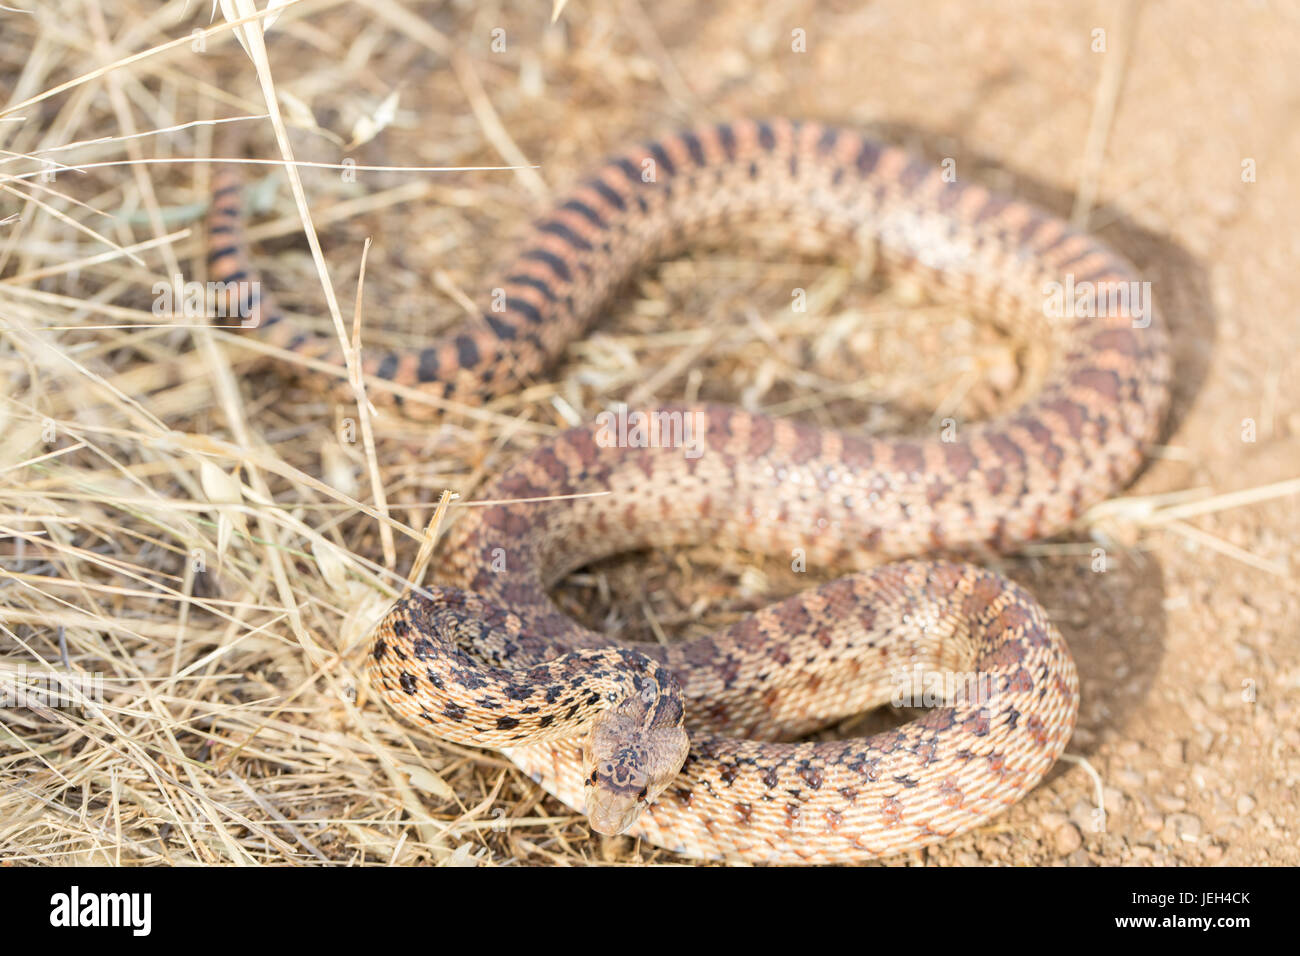 Pacific Gopher Snake (Pituophis catenifer catenifer) Adult in defensive posture. Stock Photo